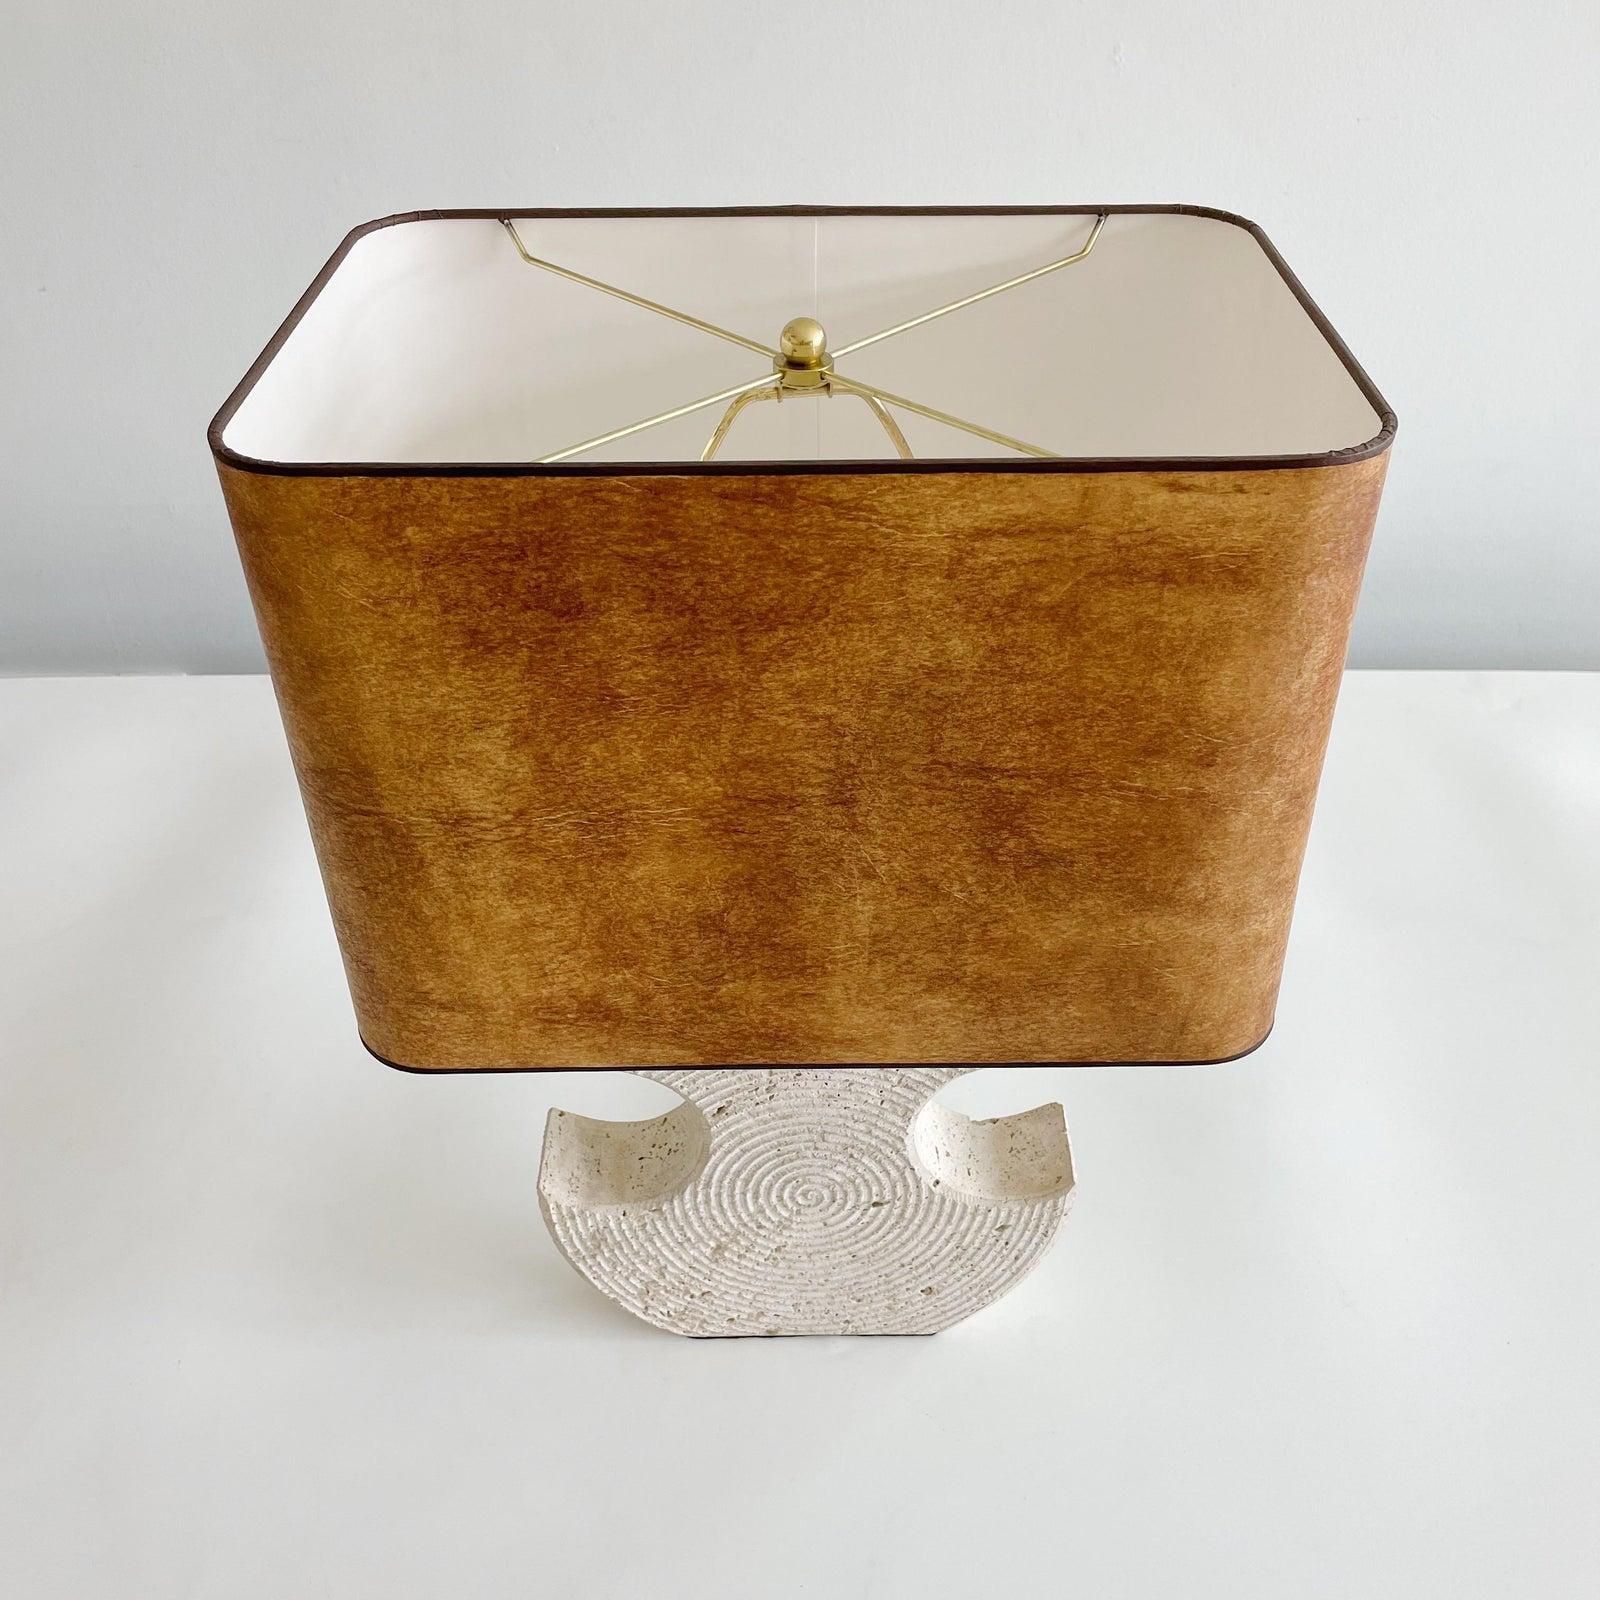 Solid Italian travertine lamp with circular incised pattern on both sides. Newly professionally rewired with bronze silk cord and new brass fittings. Comes with Leather shade. which measures 16 wide x 11 deep x 11 High. Height of actual travertine